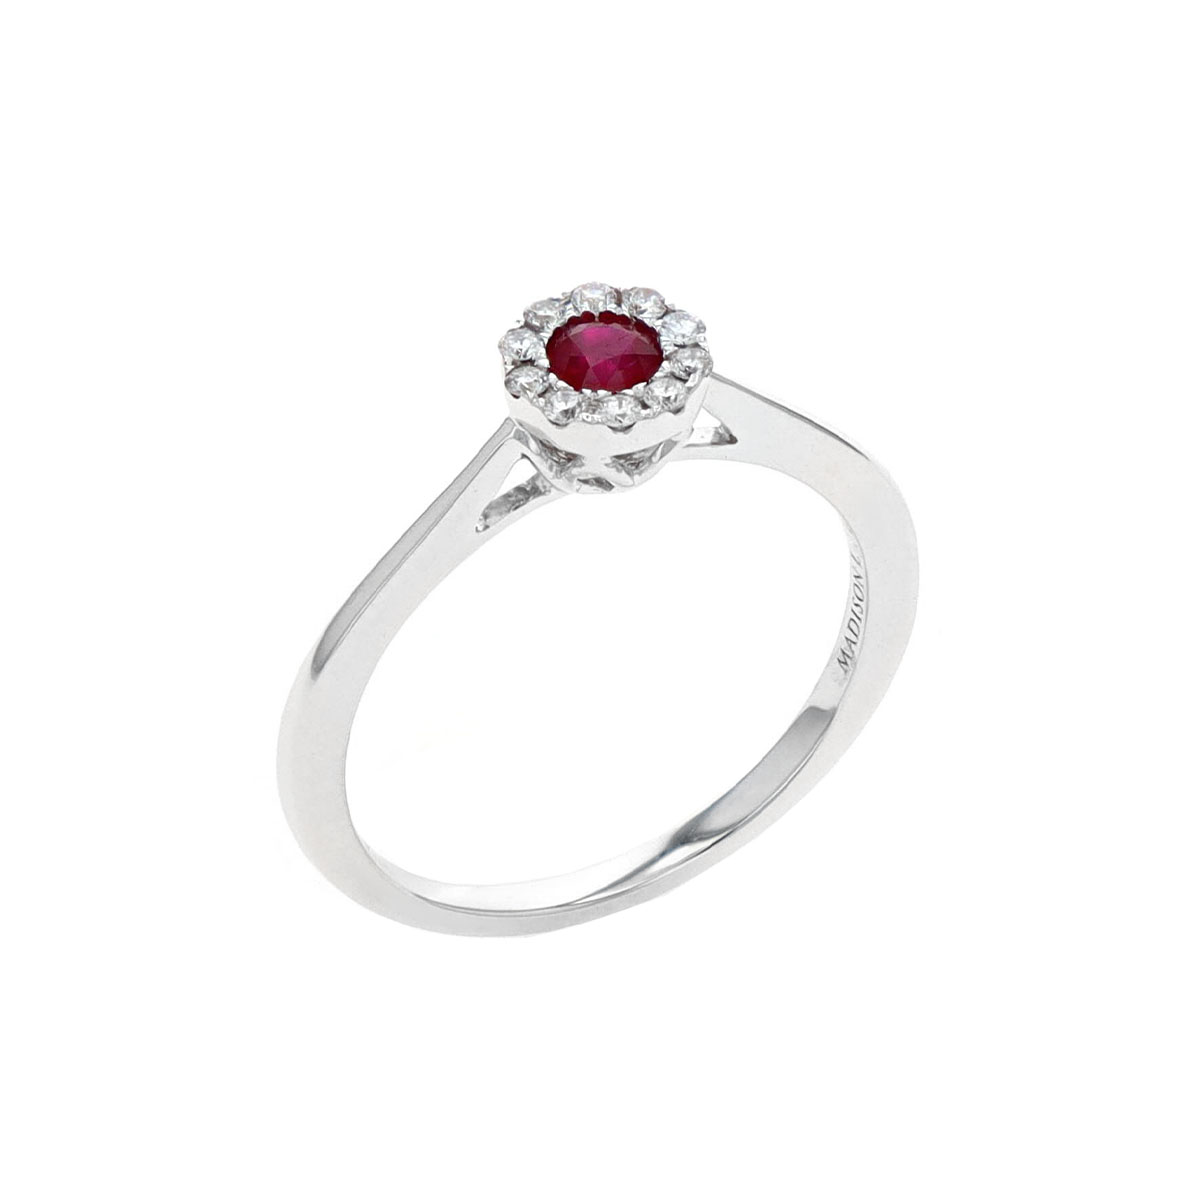 14K White Gold Ruby and Diamond Halo Ring